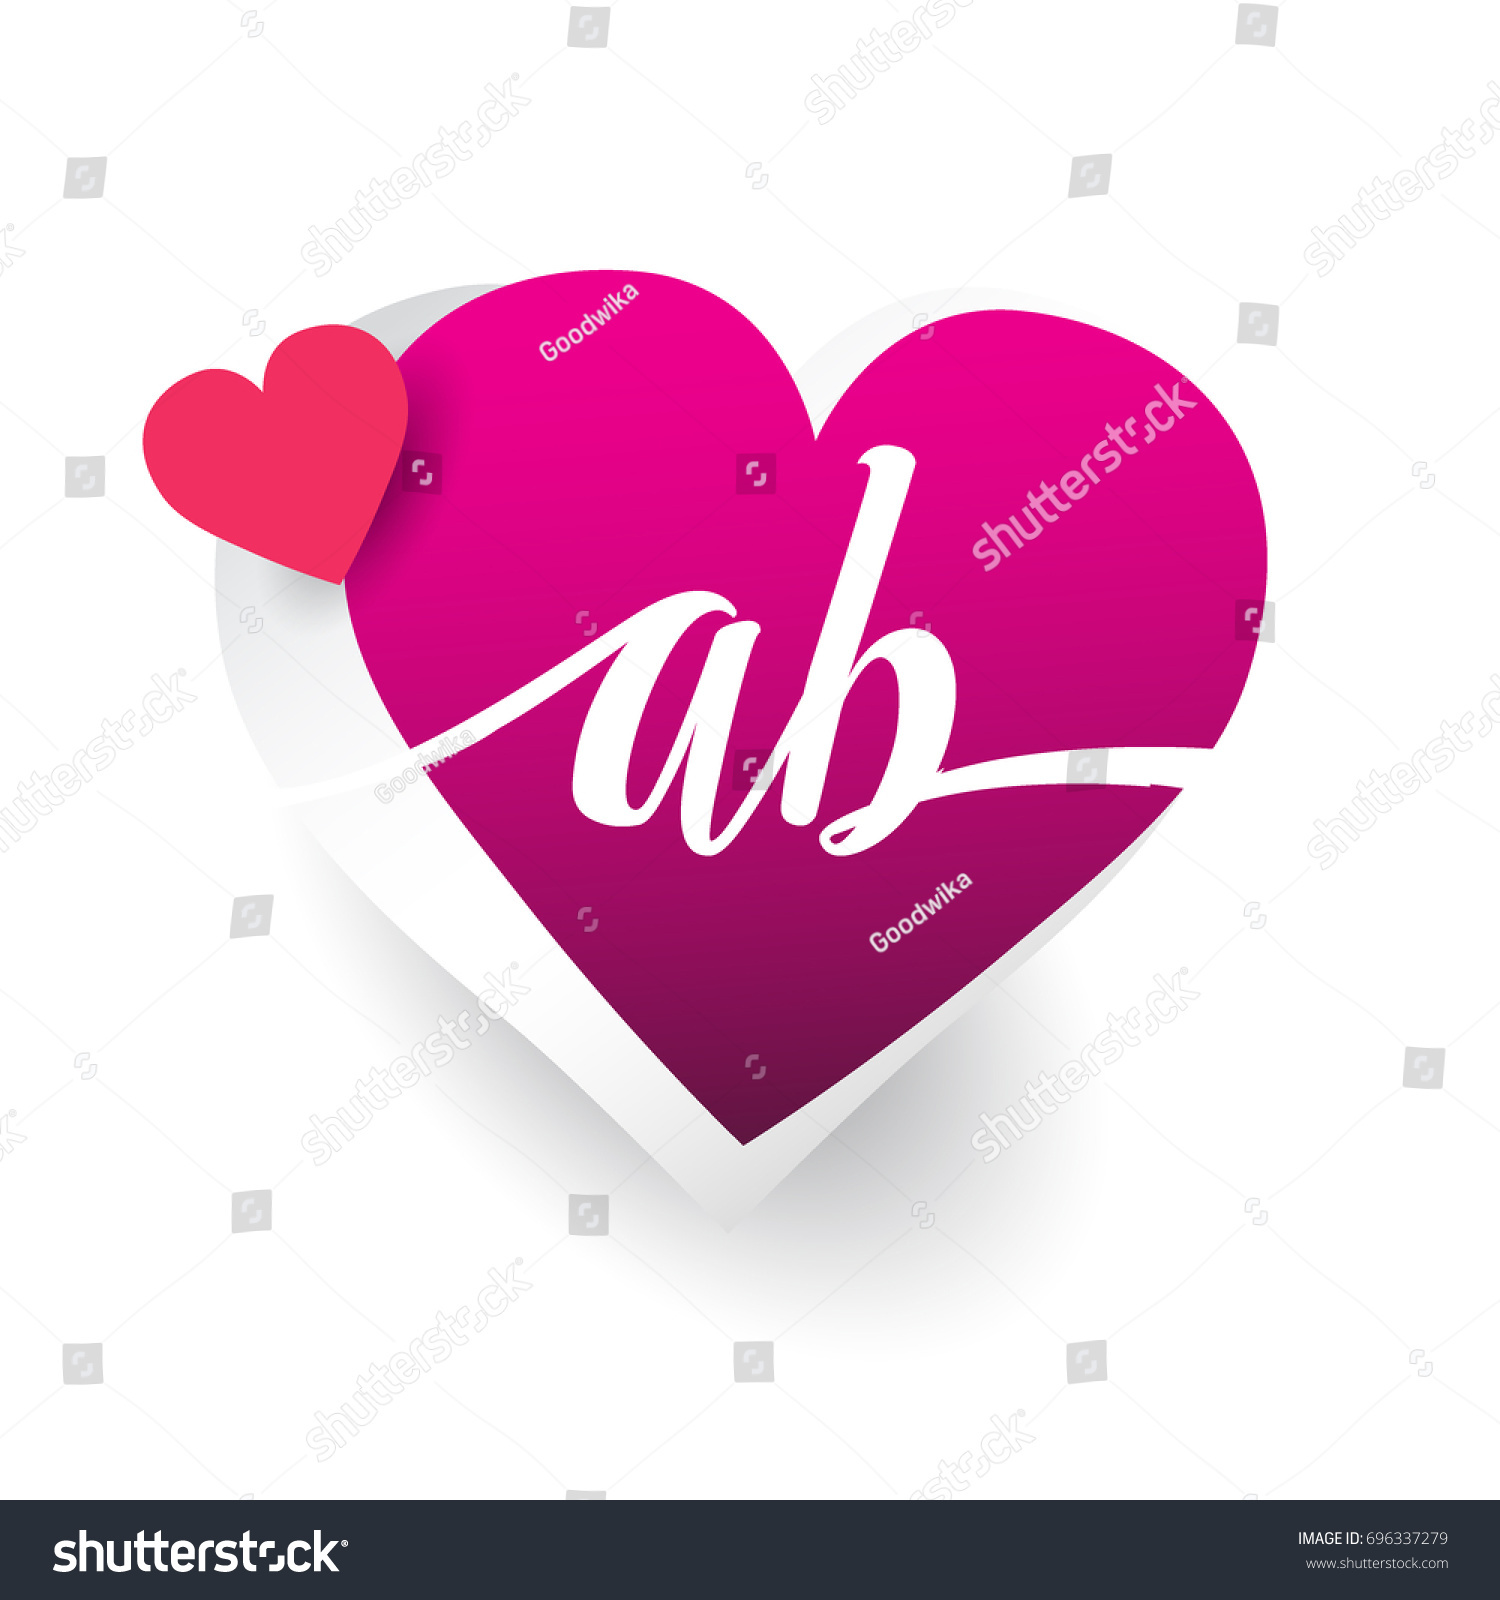 Featured image of post A B Name Love Images Hd / Letter love dp s letter love design images s love d letter s love d letter whatsapp status s letter love design s love letter image download god&#039;s love letter for you s love letter wallpapers free download s love letter images free download love letter from the.